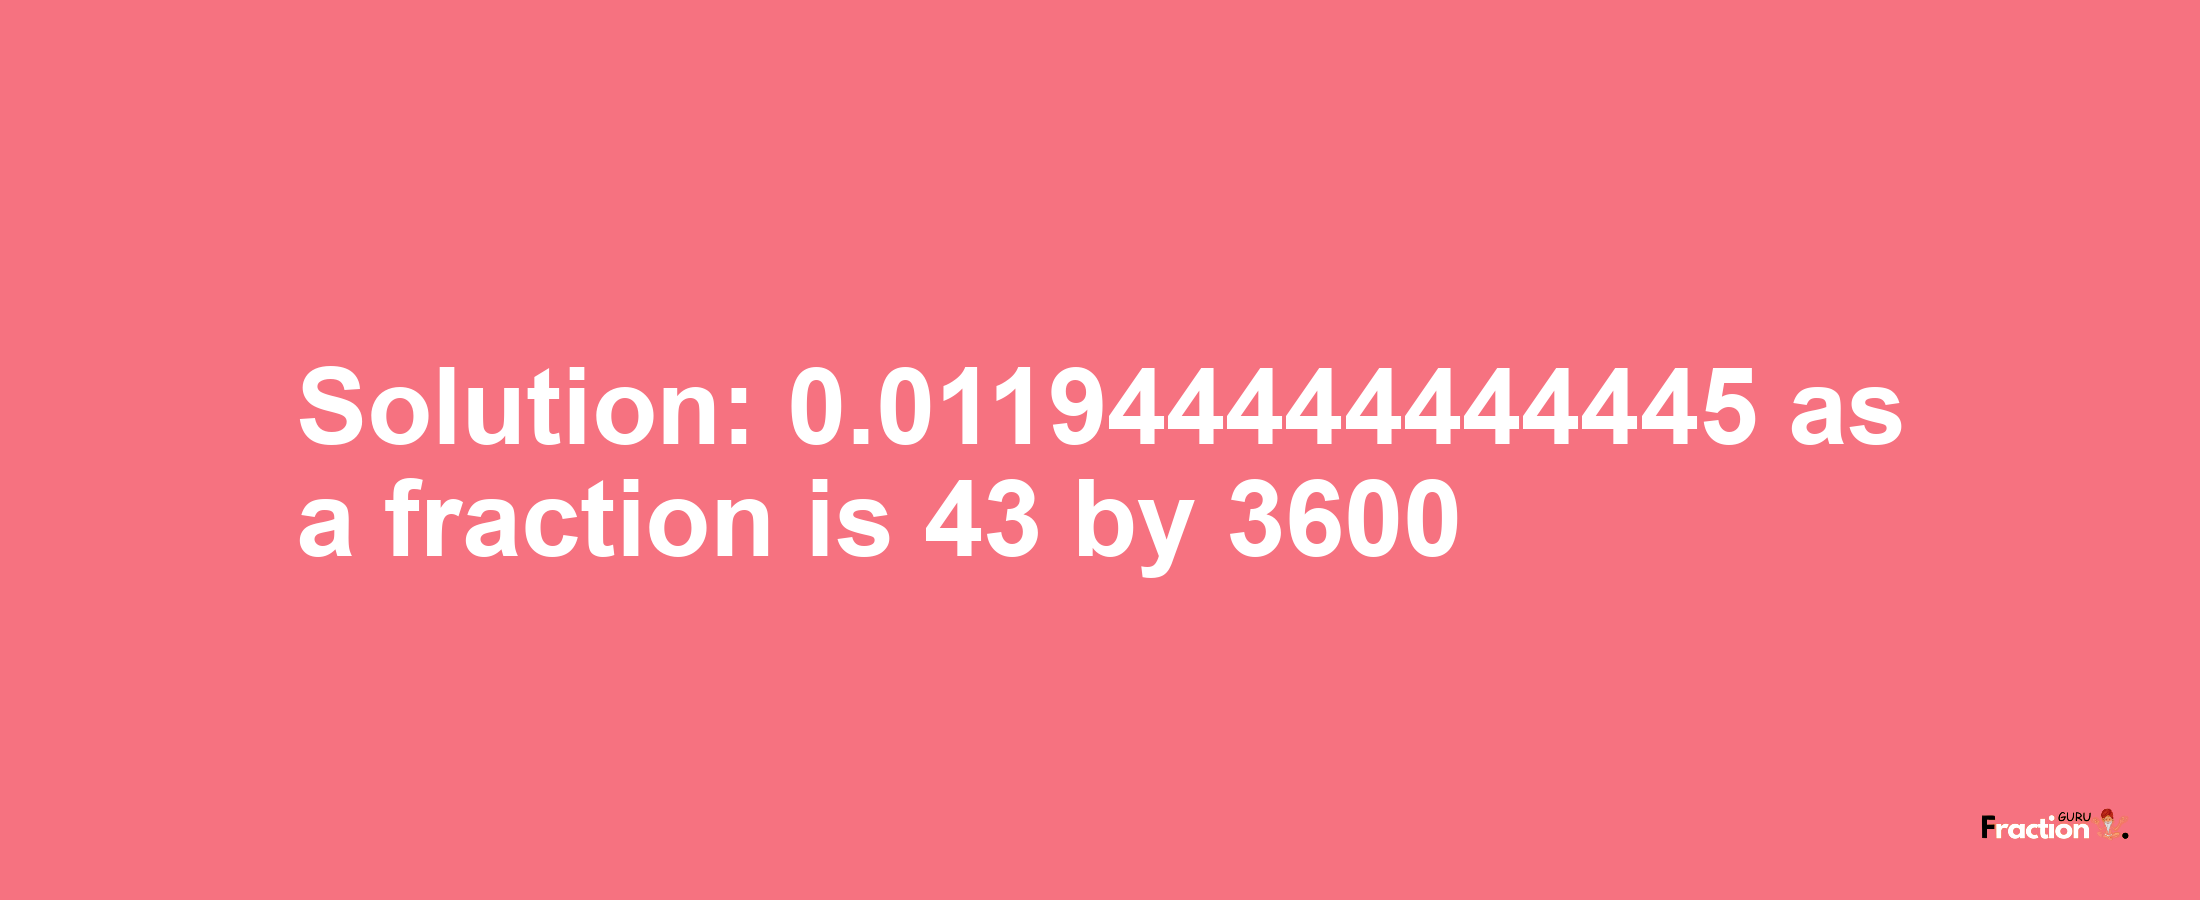 Solution:0.011944444444445 as a fraction is 43/3600